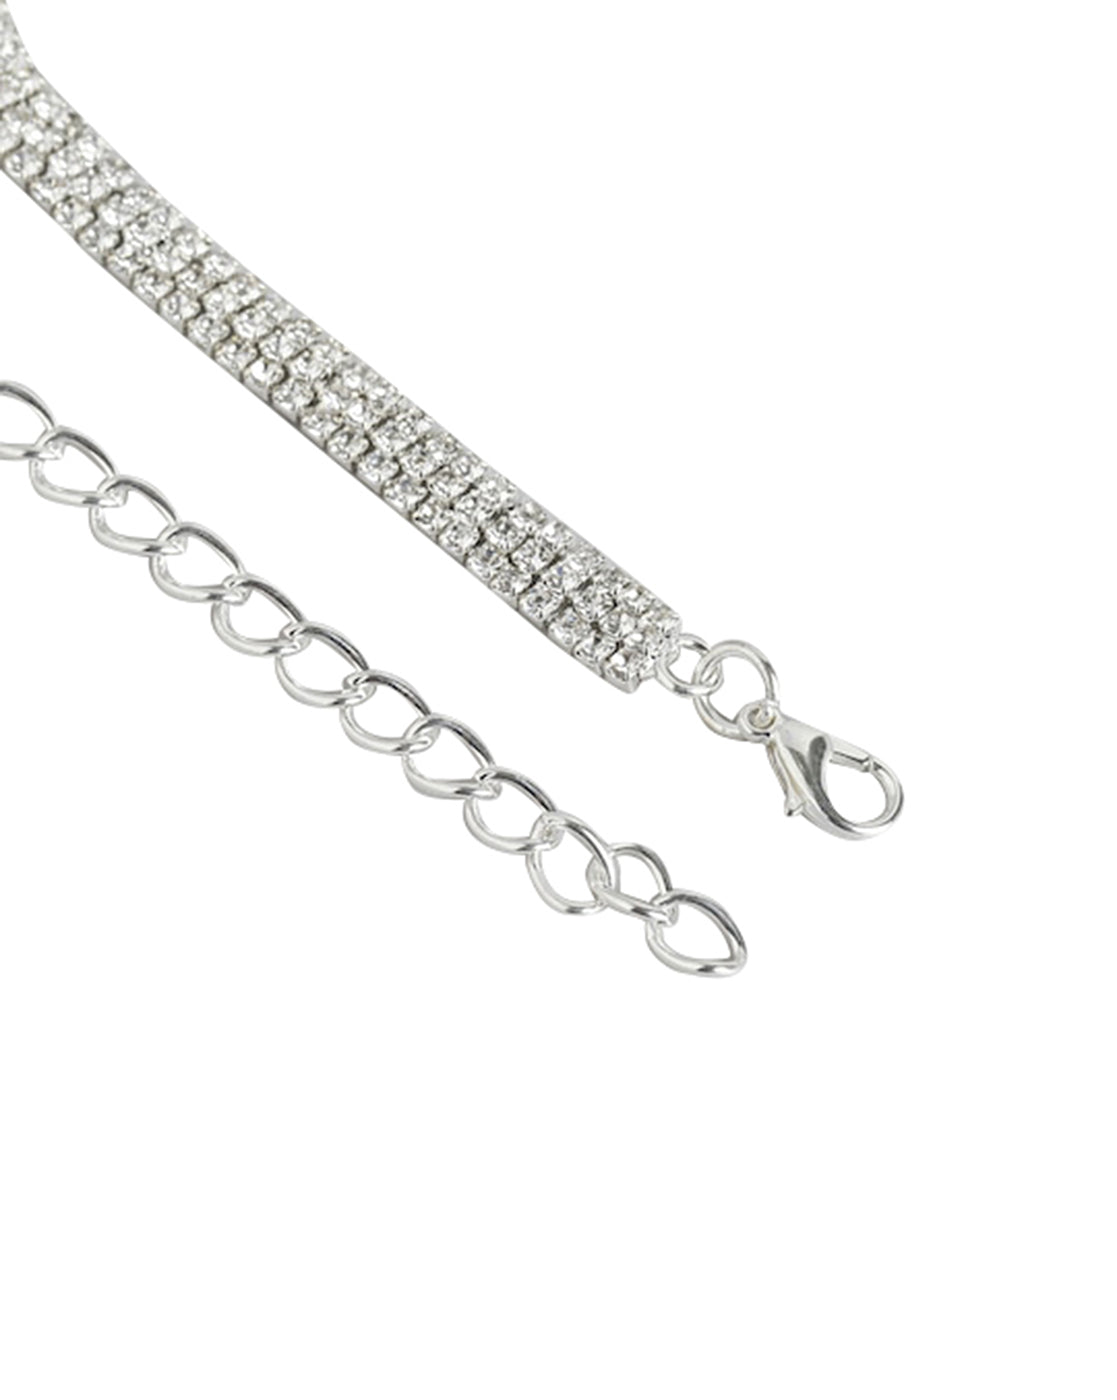 Rhodium Plated With Cz Stylish Necklace For Women